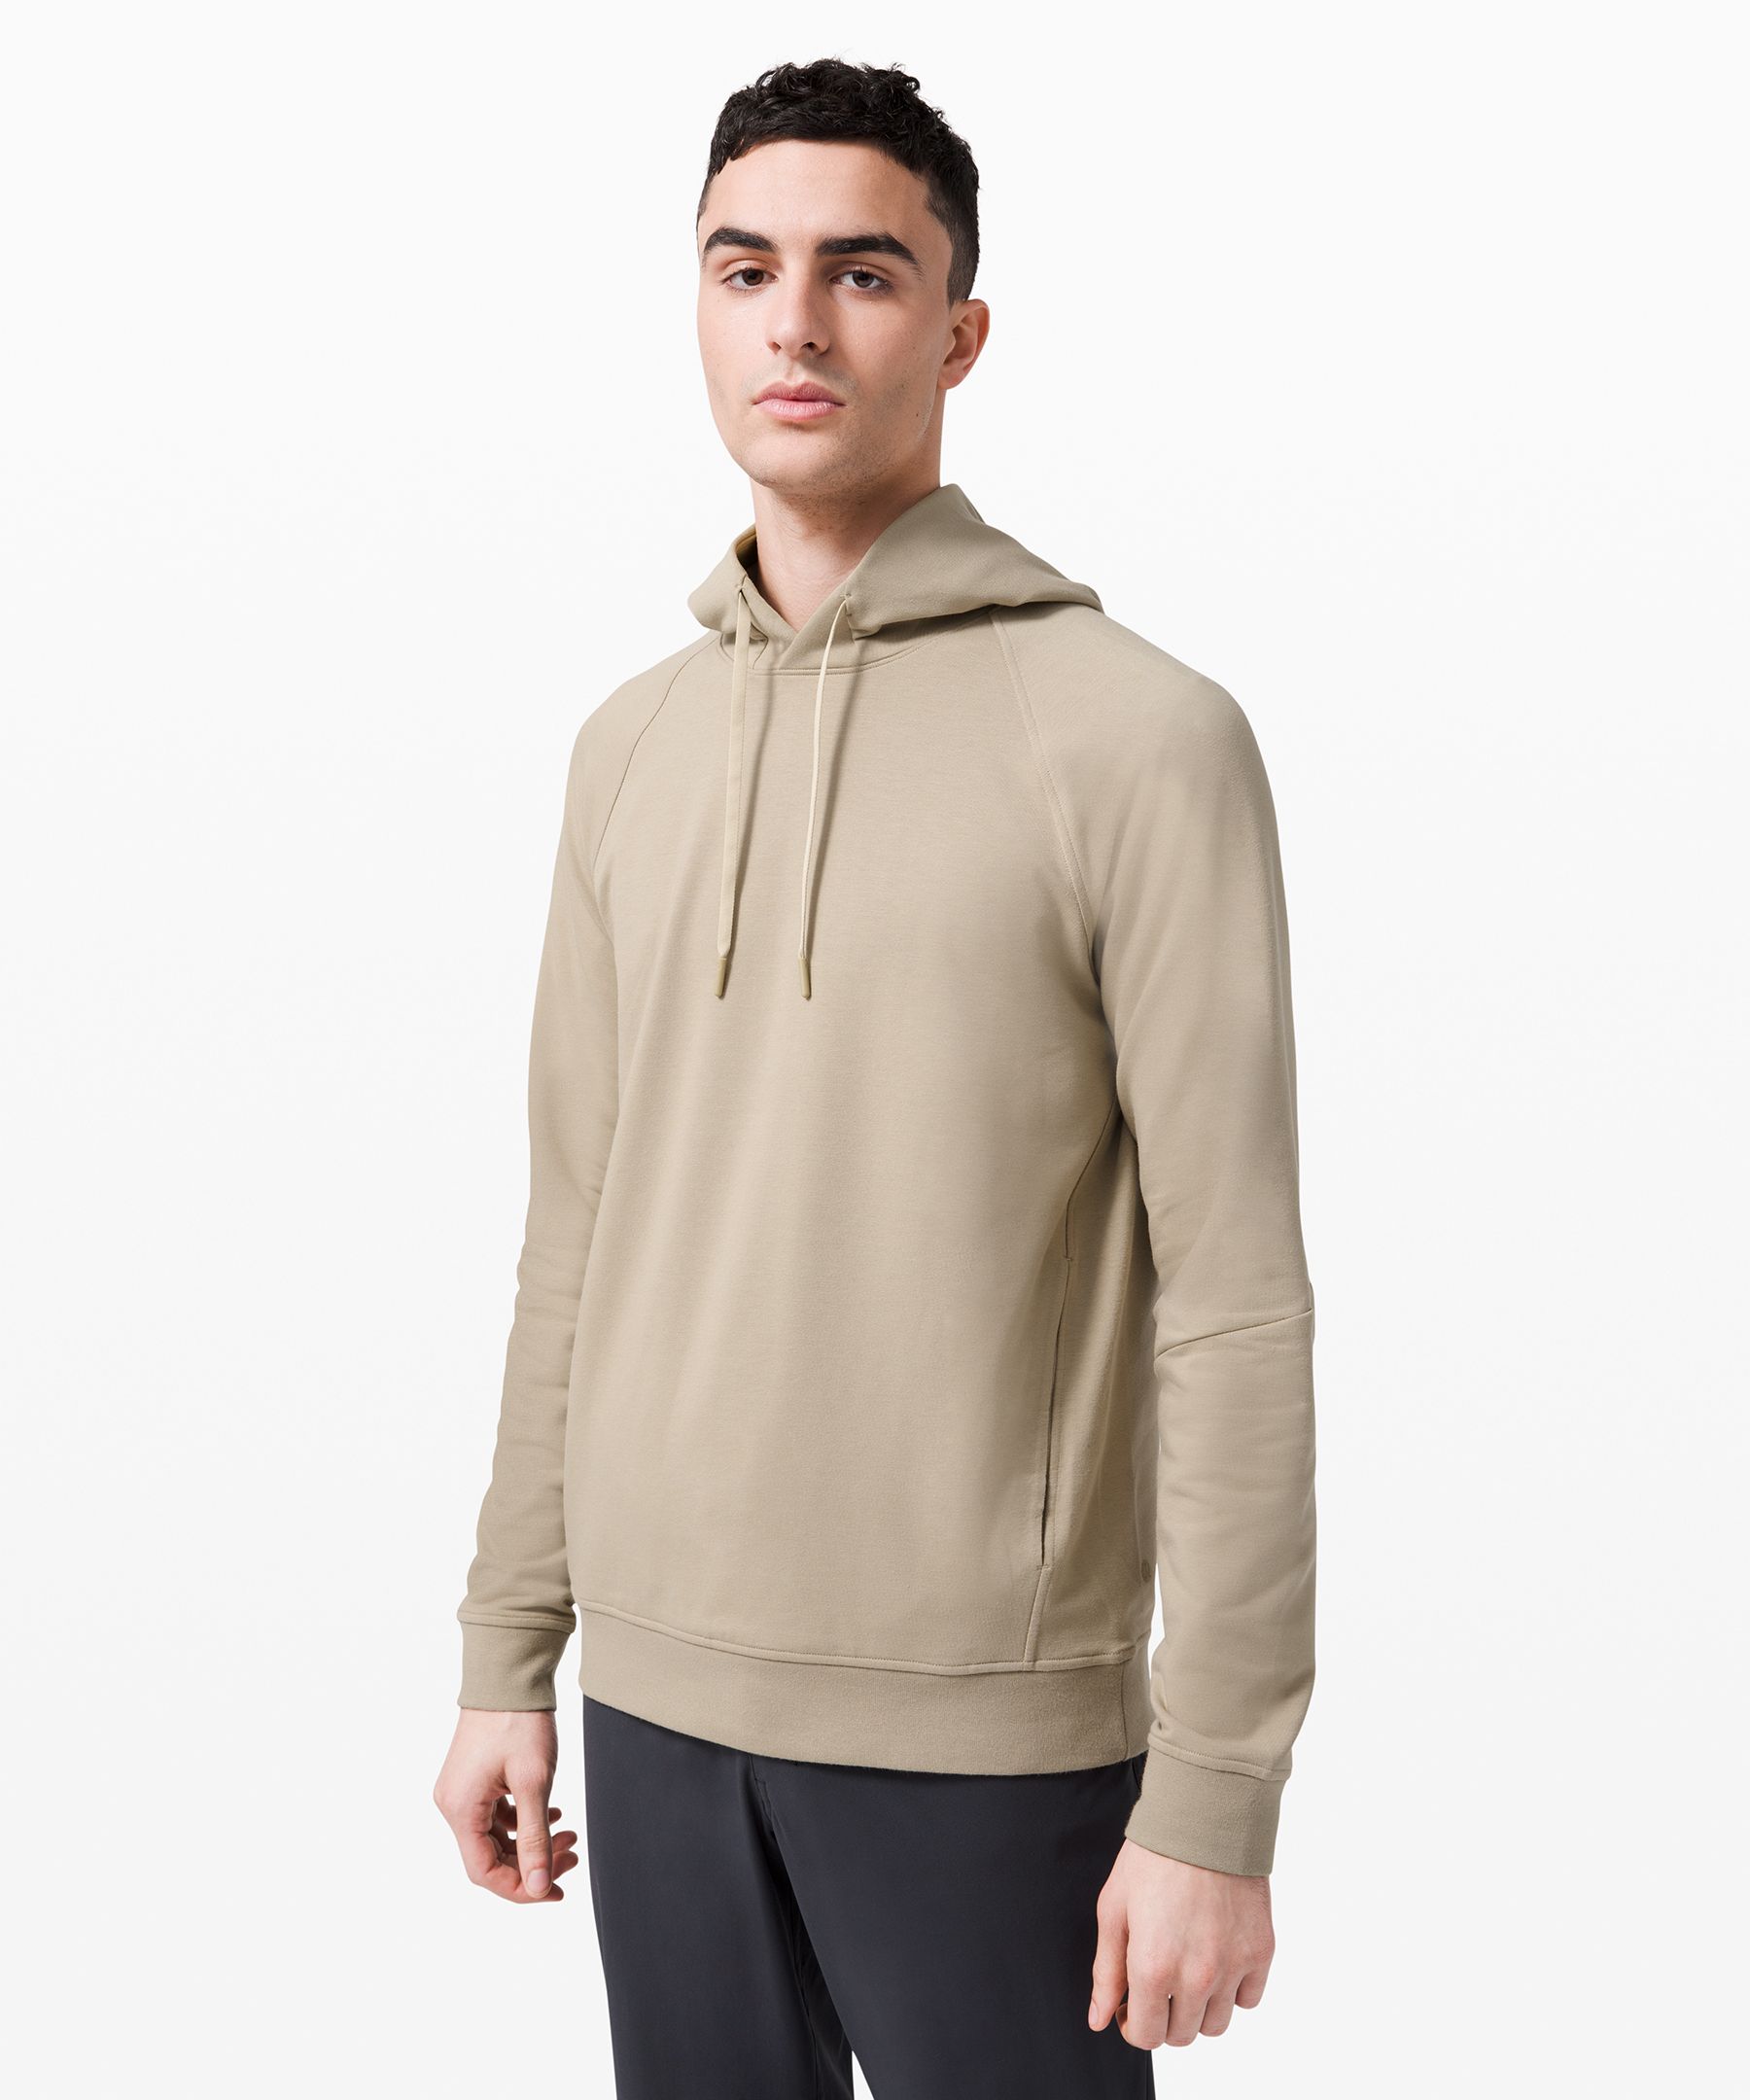 Lululemon City Sweat Pullover Hoodie French Terry In Khaki